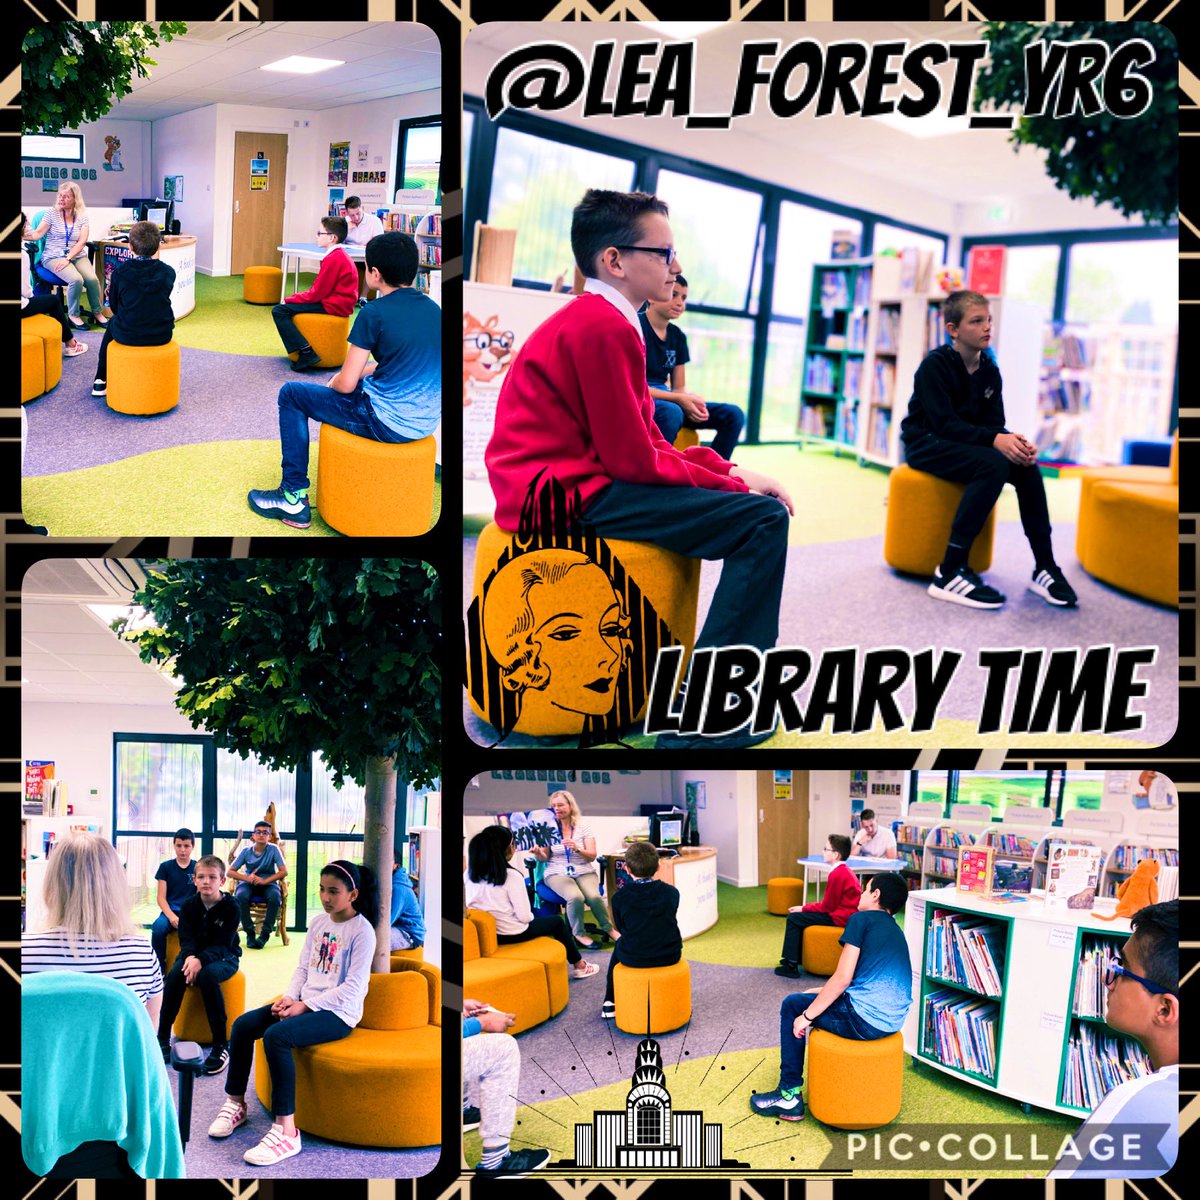 Library time📚 @lea_forest_aet @Lea_Forest_HT @lea_forest_dep @lea_forest_eng @AETAcademies @TheReadingRoom2 @reading_realm @ReaderResilient @Reading4FunUK @GreatSchLibs @WellcomeLibrary @librarymice @TrustReading @patronofreading #LibraryTime #ReadingForPleasure #Read #LFP6MW